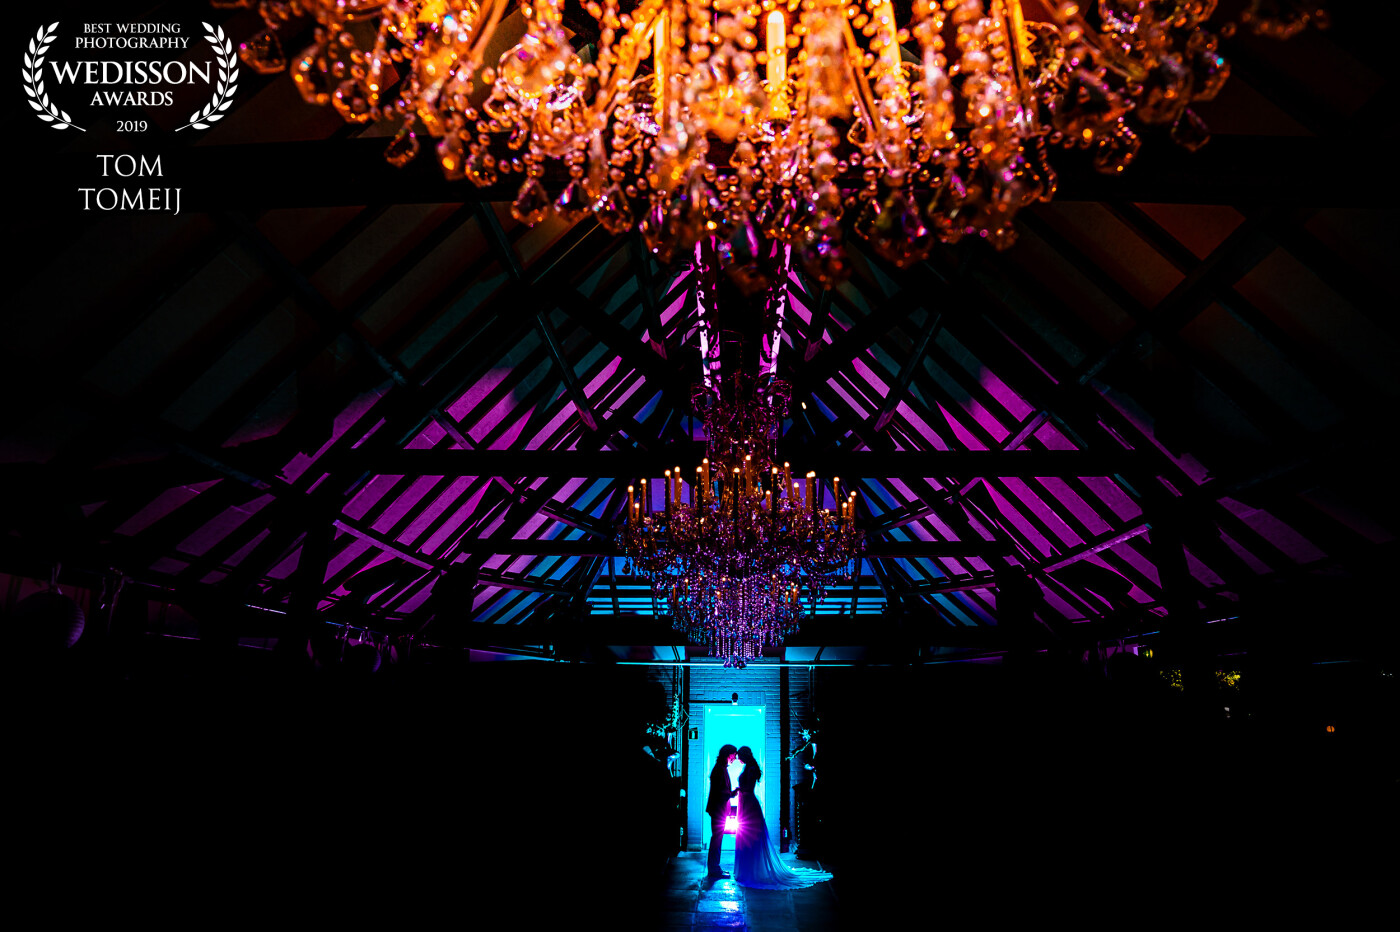 These were the colors of the wedding theme. So I wanted to give them this photo to make them extra happy with the reportage. I climbed on a chair and shot it with a 17-28mm side angle lens. "Chandeliers are marvels of drop-dead showiness, the jewelry of architecture"<br />
Peter York